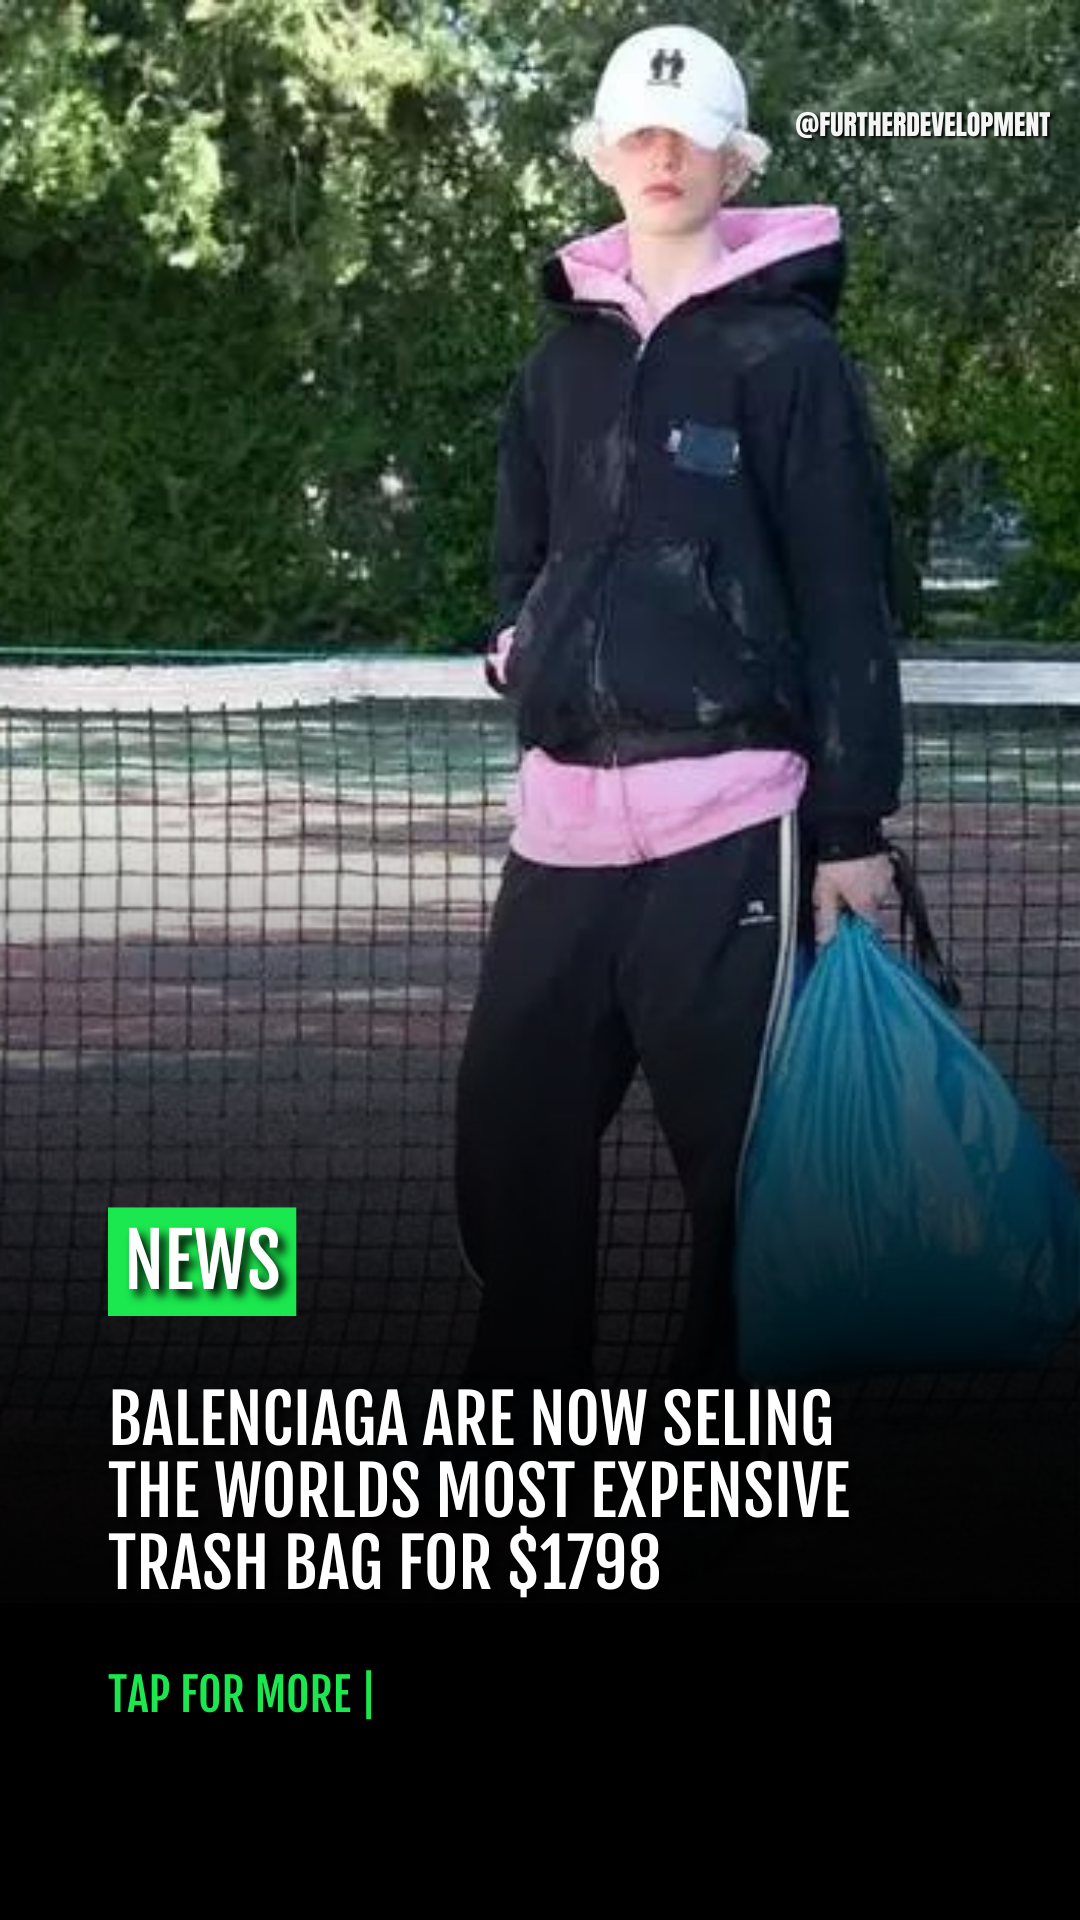 BALENCIAGA ARE NOW SELING THE WORLDS MOST EXPENSIVE TRASH BAG FOR $1790